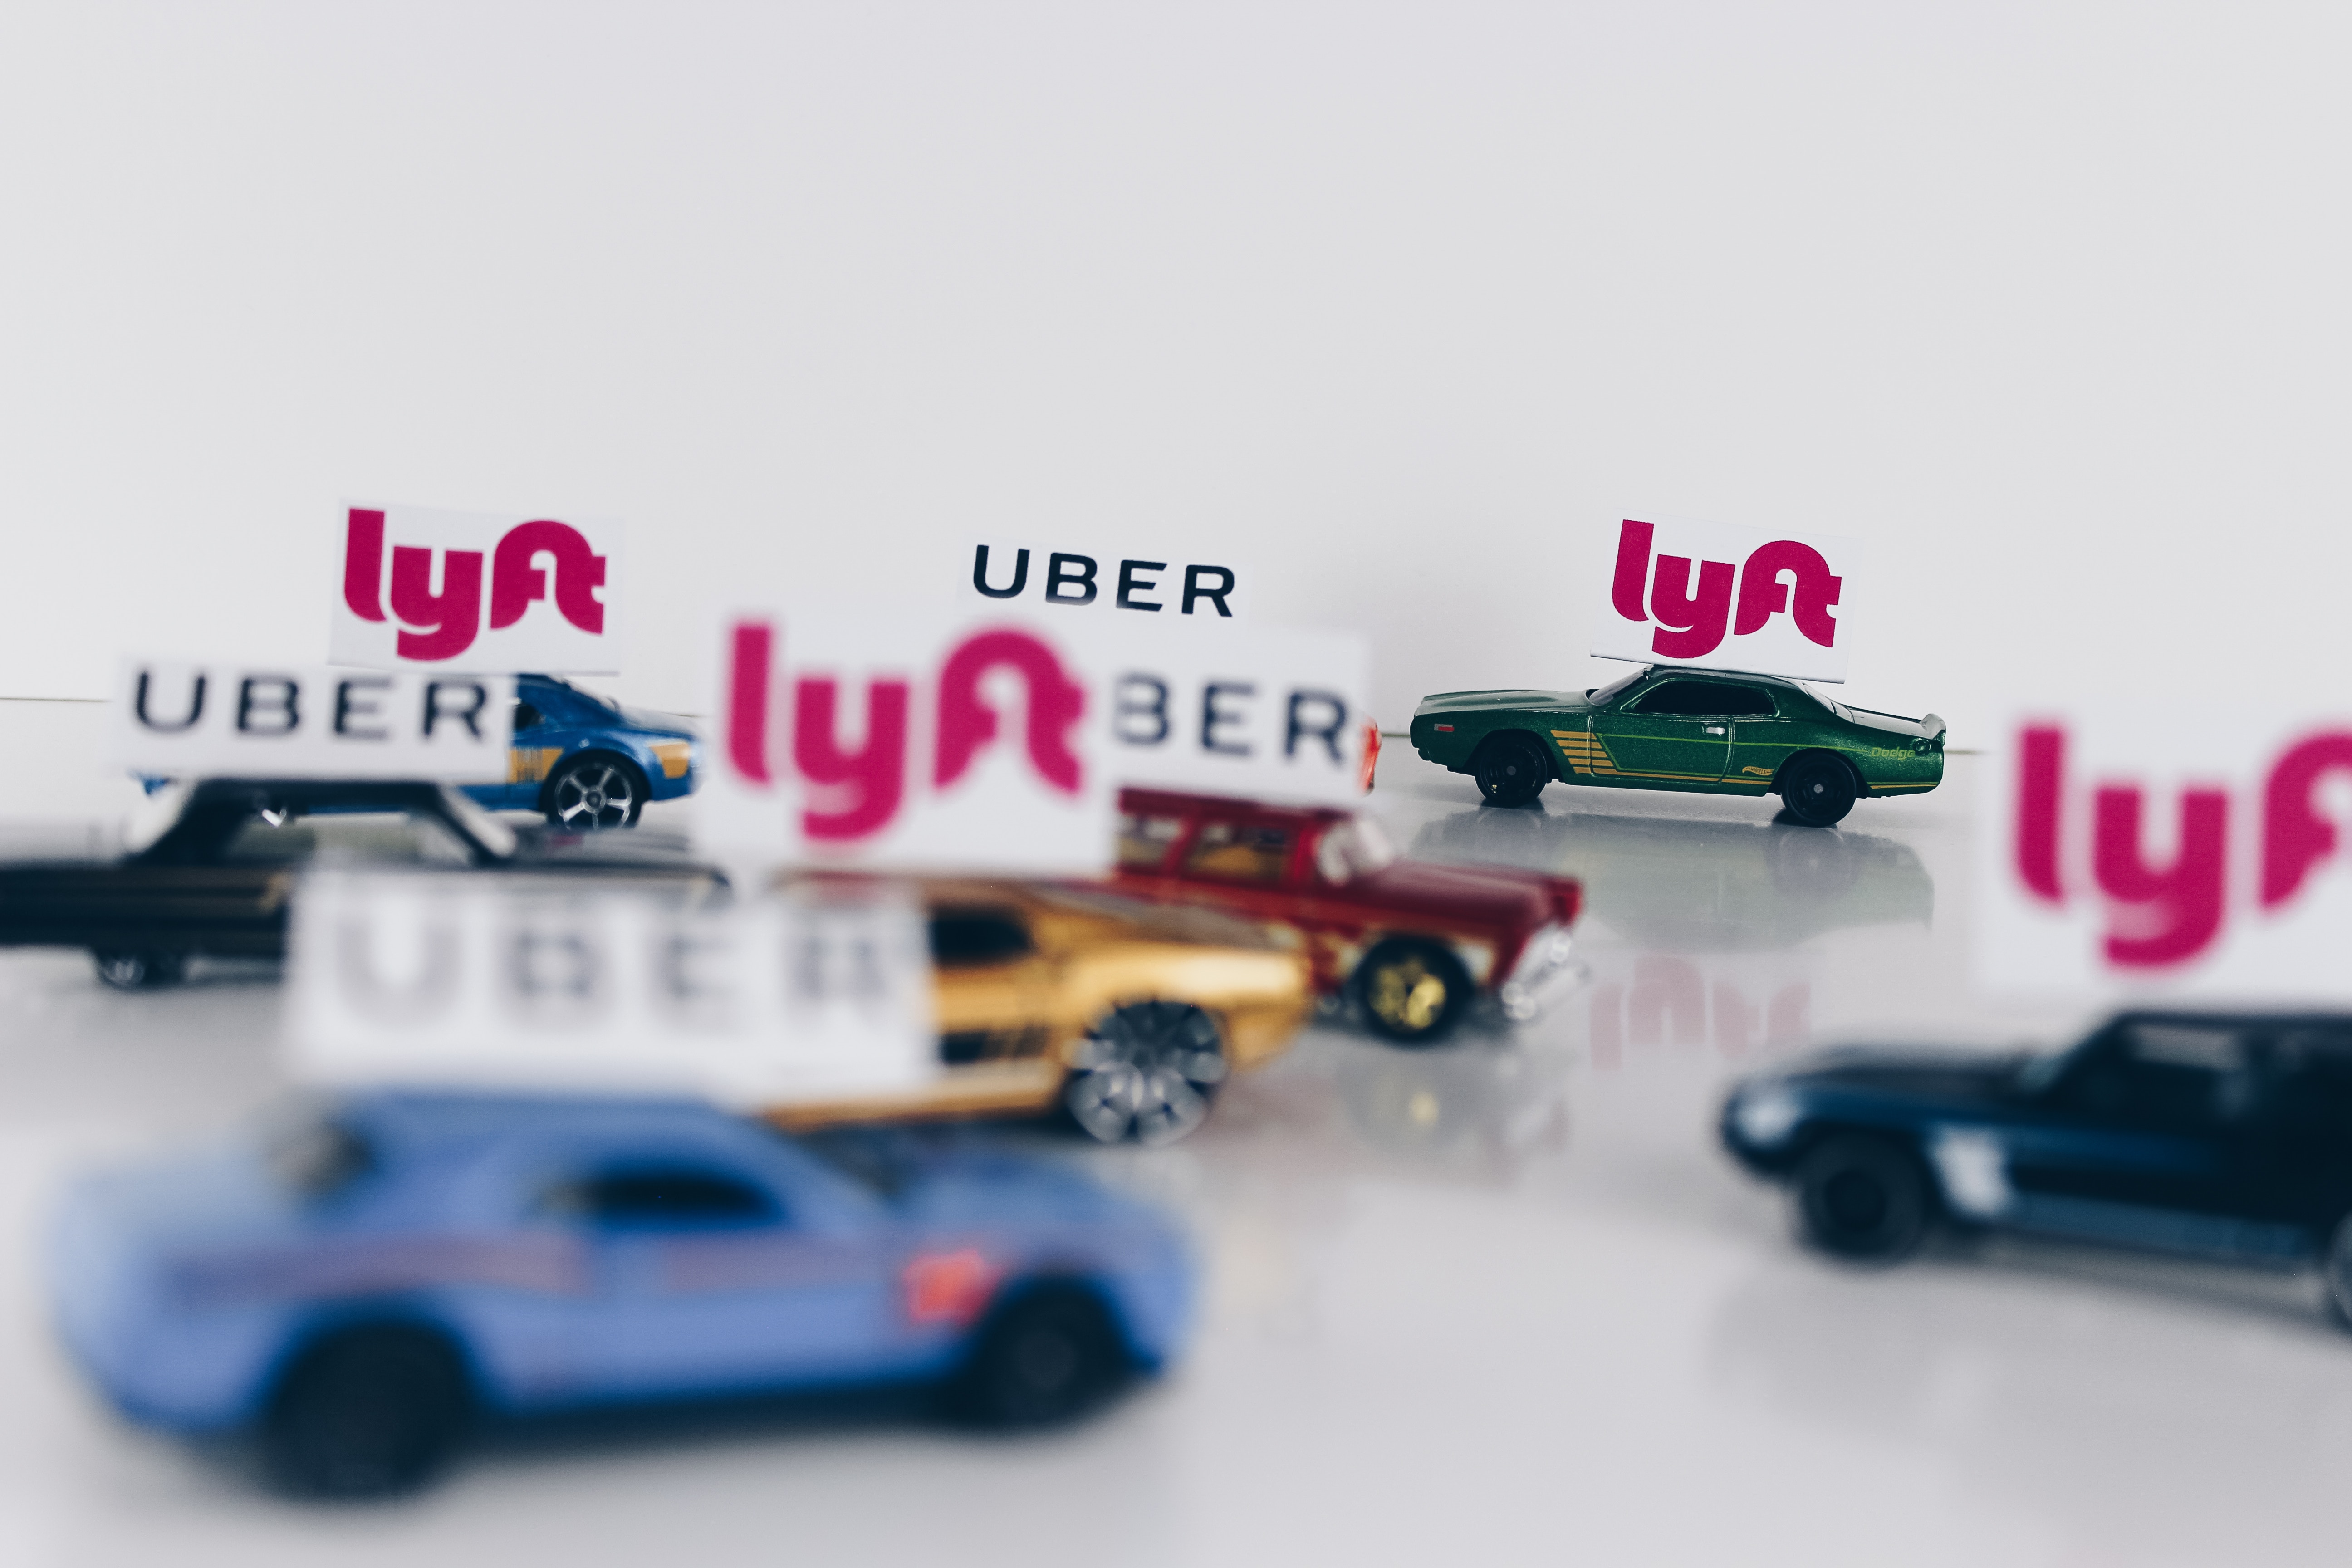 Image of toy Uber and Lyft cars driving around